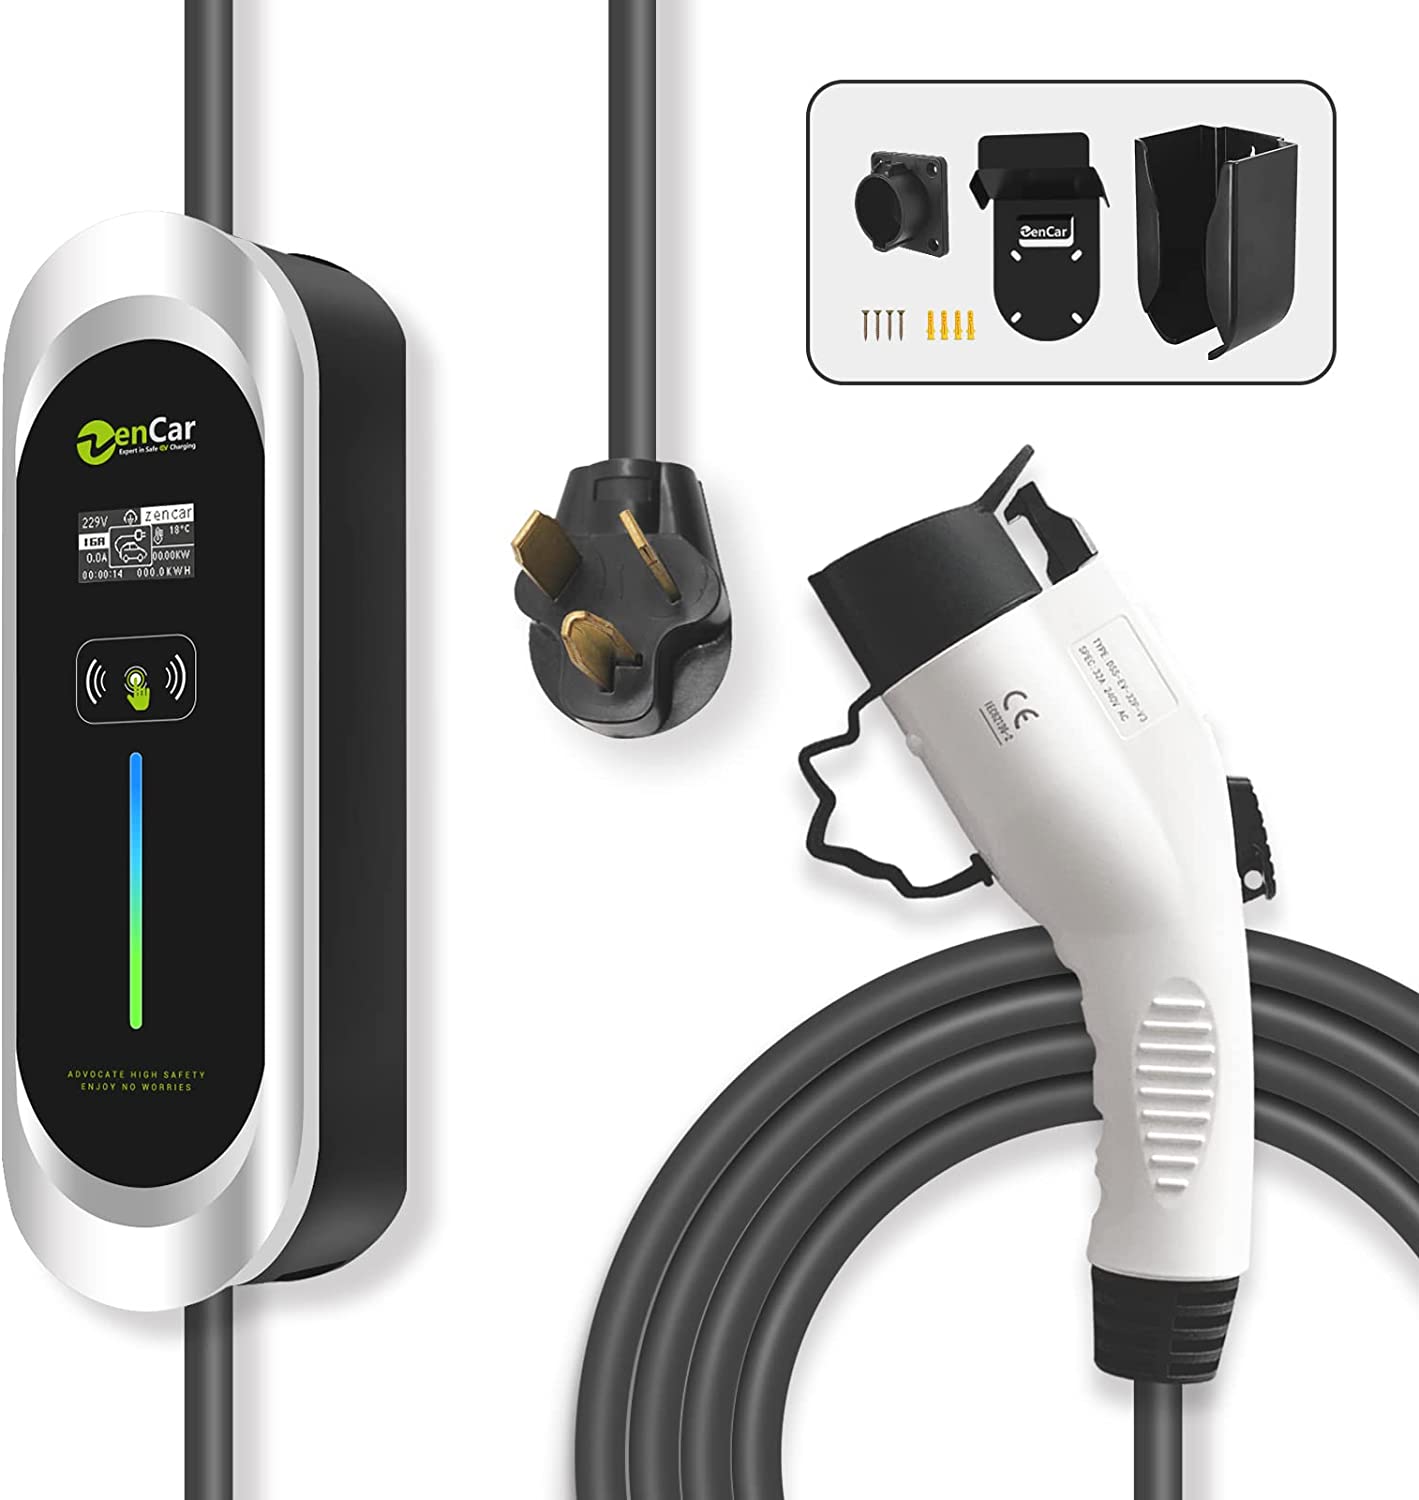 We review the Keruida Level 1 & 2, 16A / 32A / 40A - Portable EV Charger